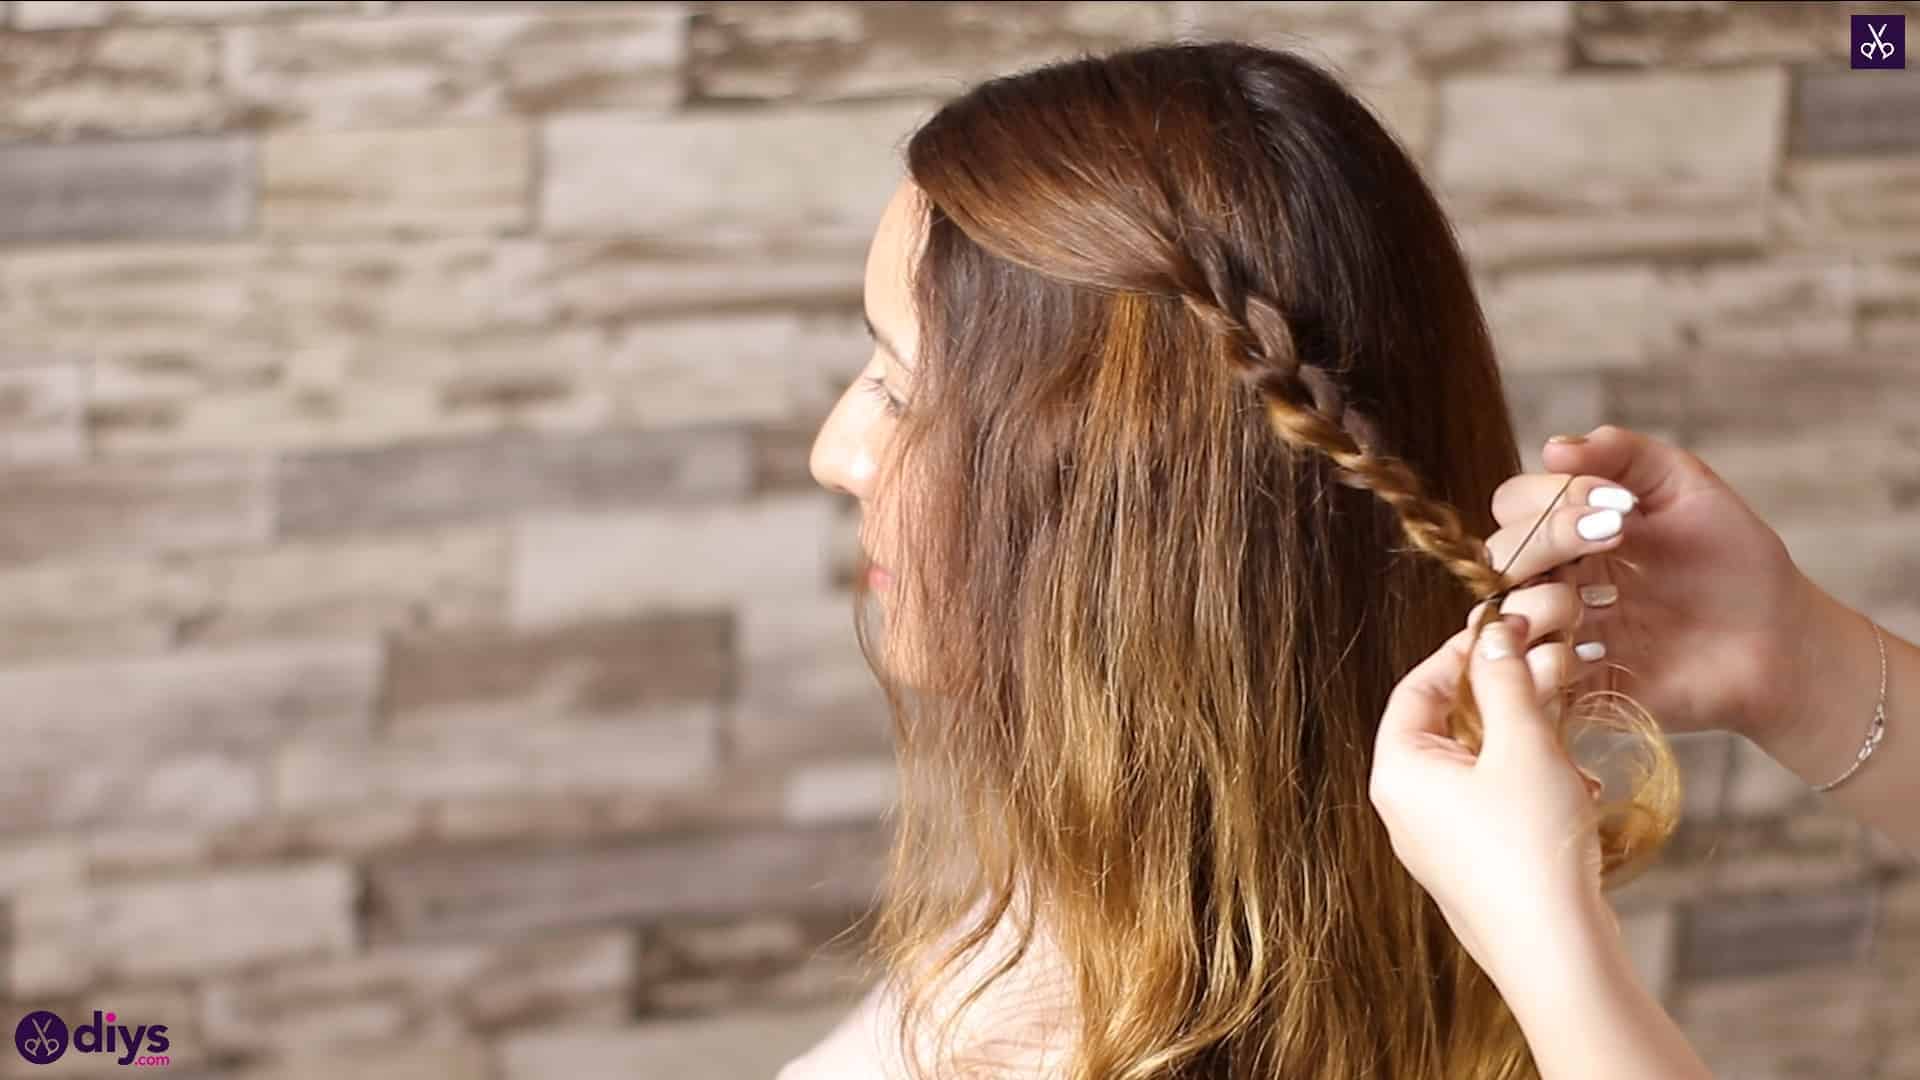 Half up, half down hairstyle for spring15